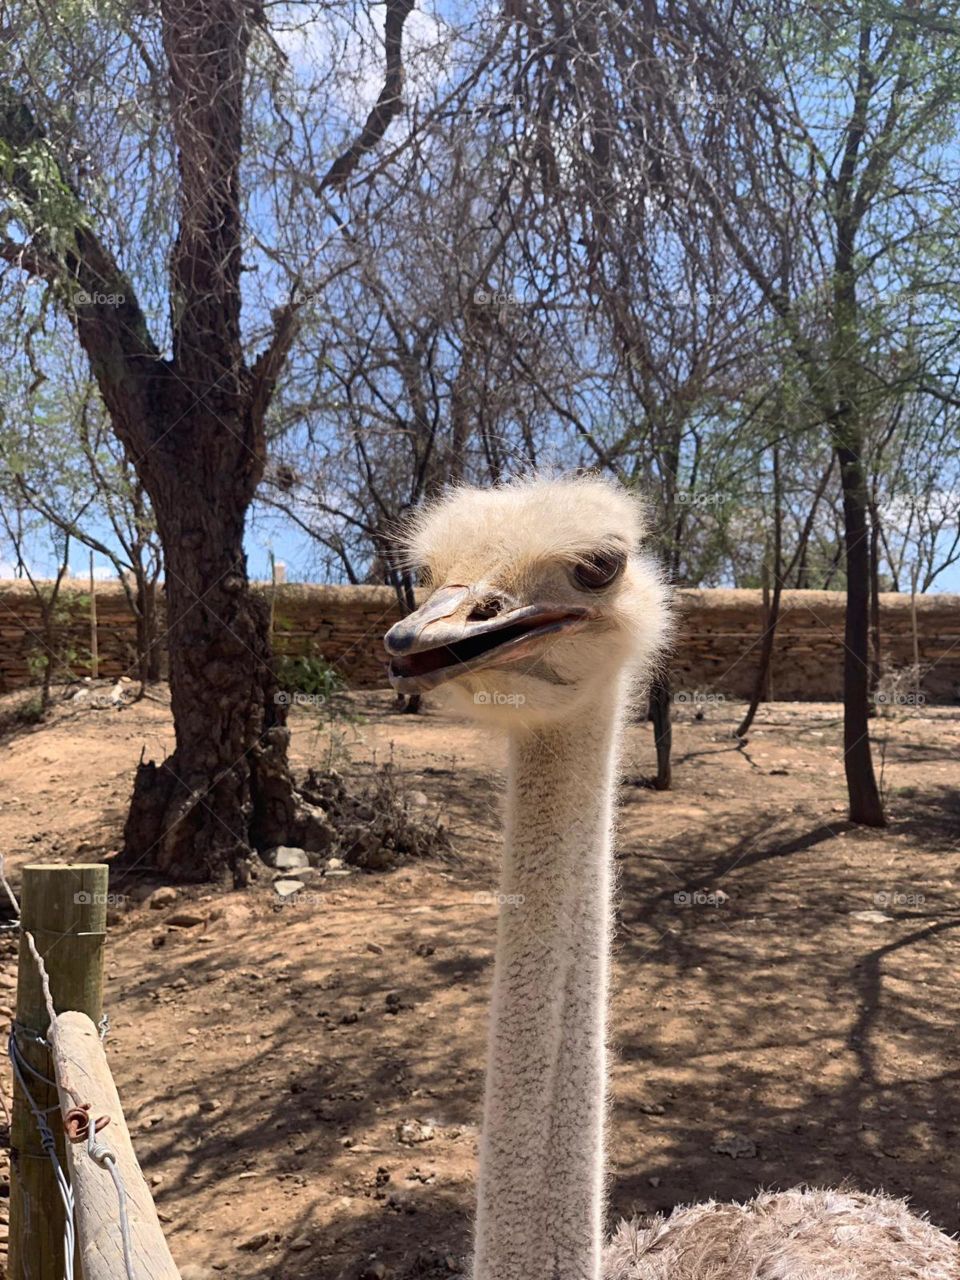 Inquisitive ostrich taking a peak at the group of strange creatures venturing near its enclosure.